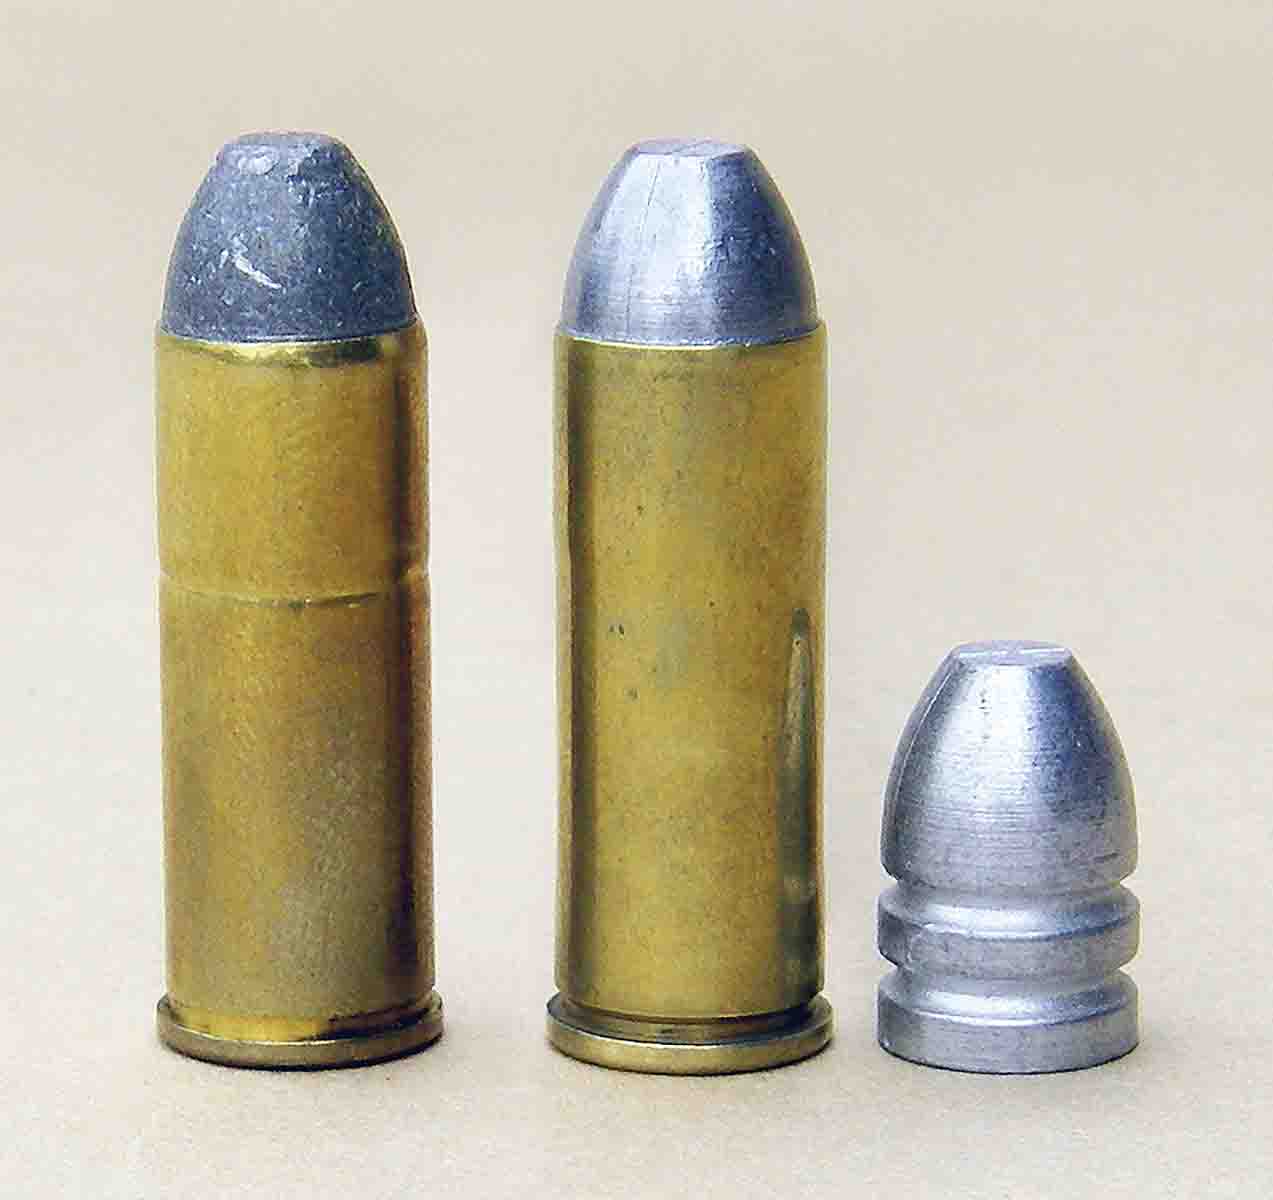 Brian’s handload (right) consists of a cast bullet from Lyman mould 454190. The bullet weighs around 255 to 260 grains and is profiled similarly to the factory load (left).